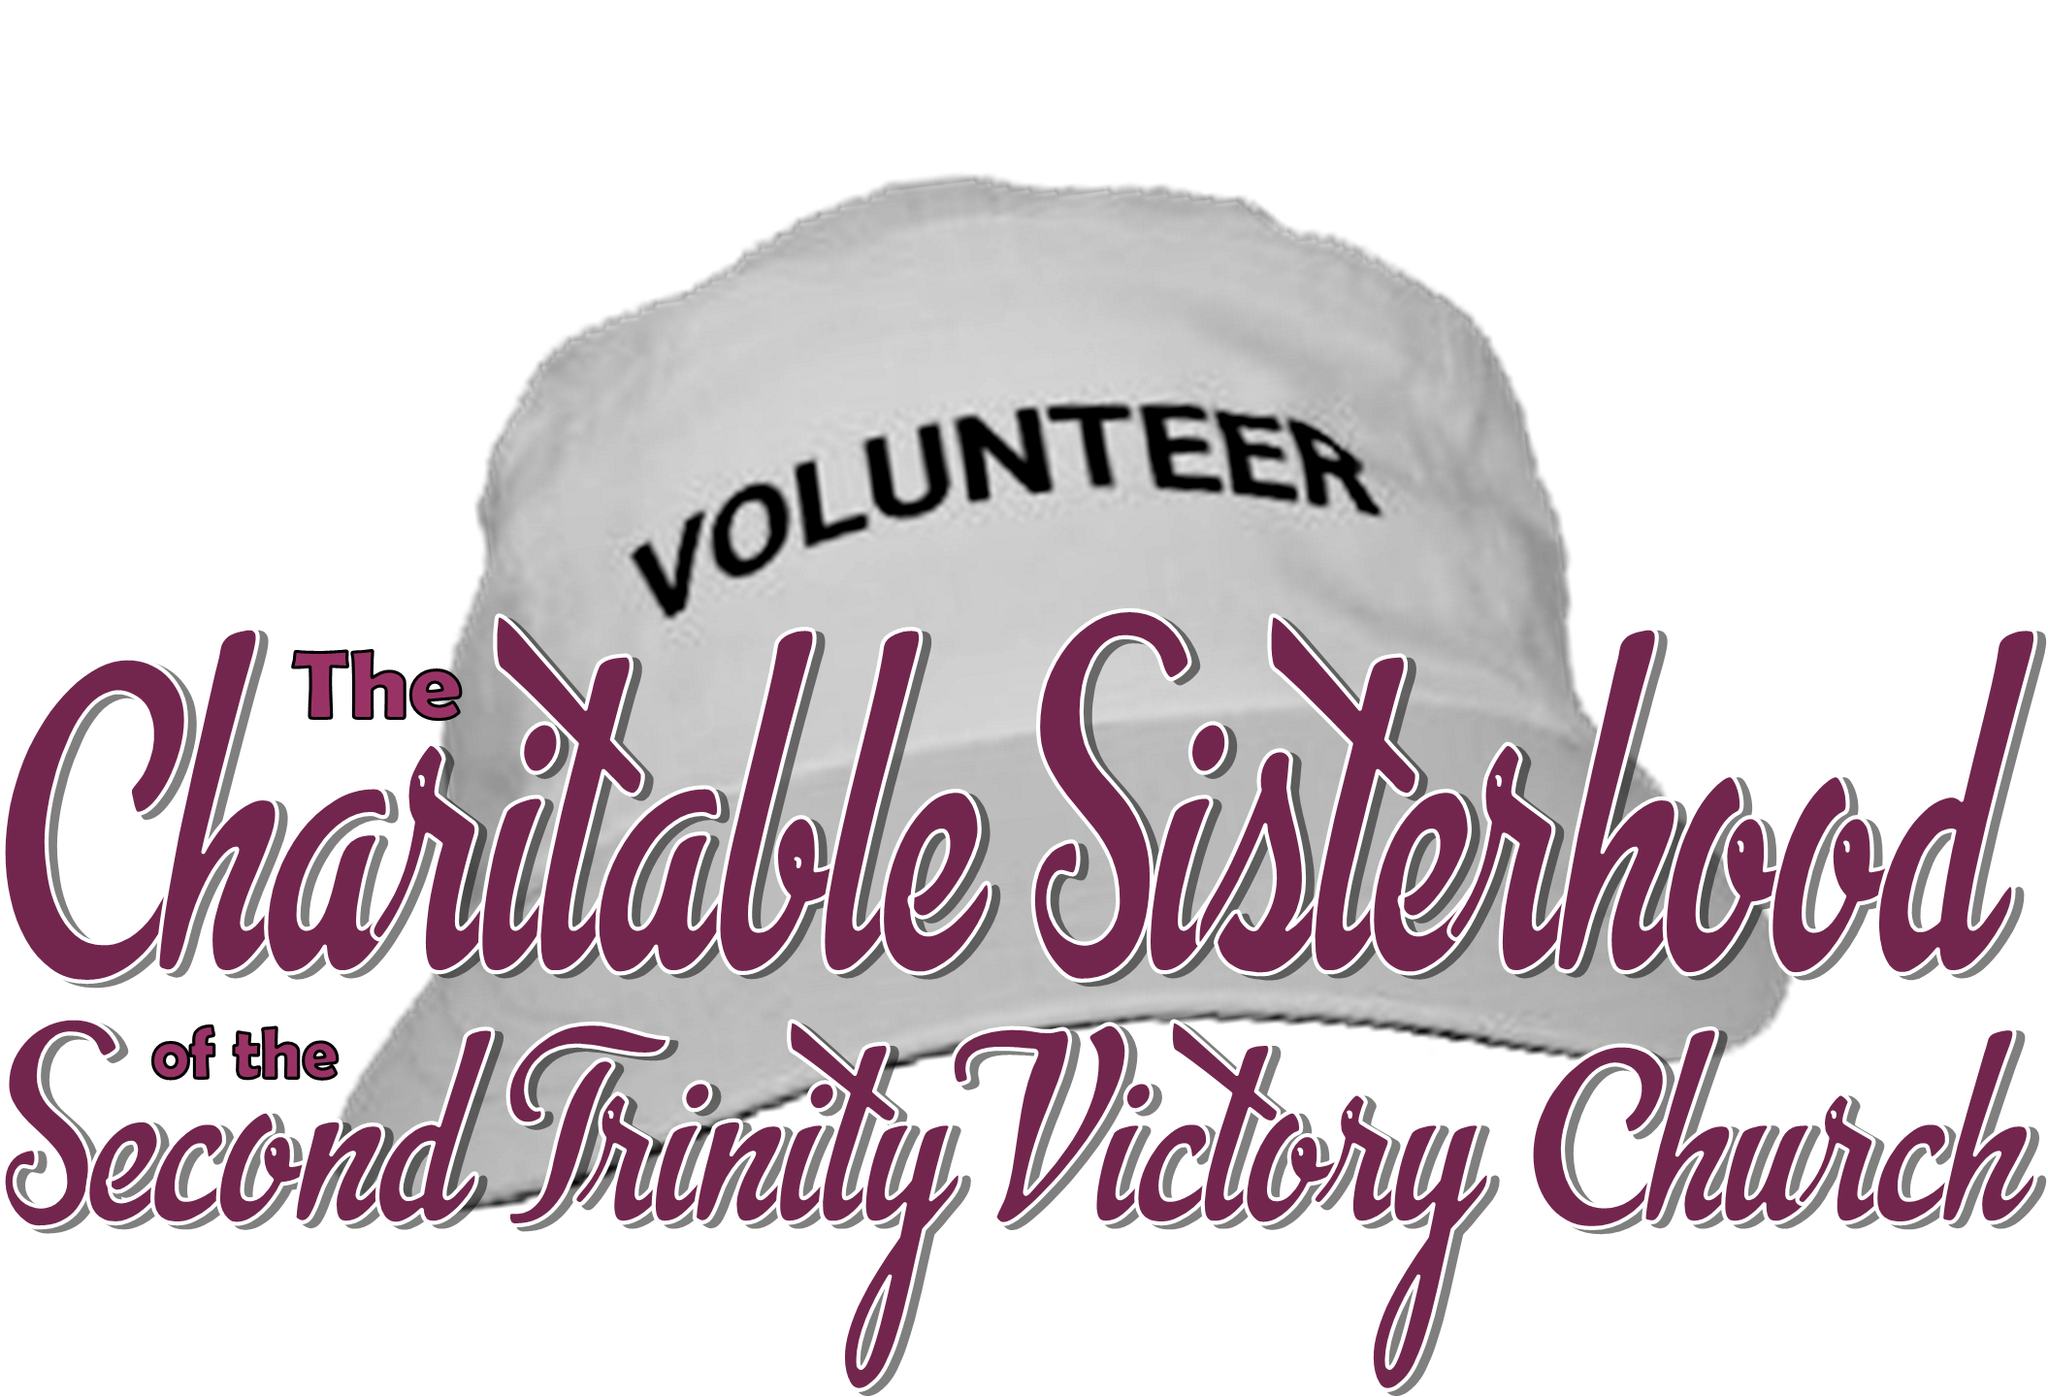 CTX3689. Auditions for The Charitable SIsterhood of the Second Trinity Victory Church, by Playhouse 2000, Kerrville